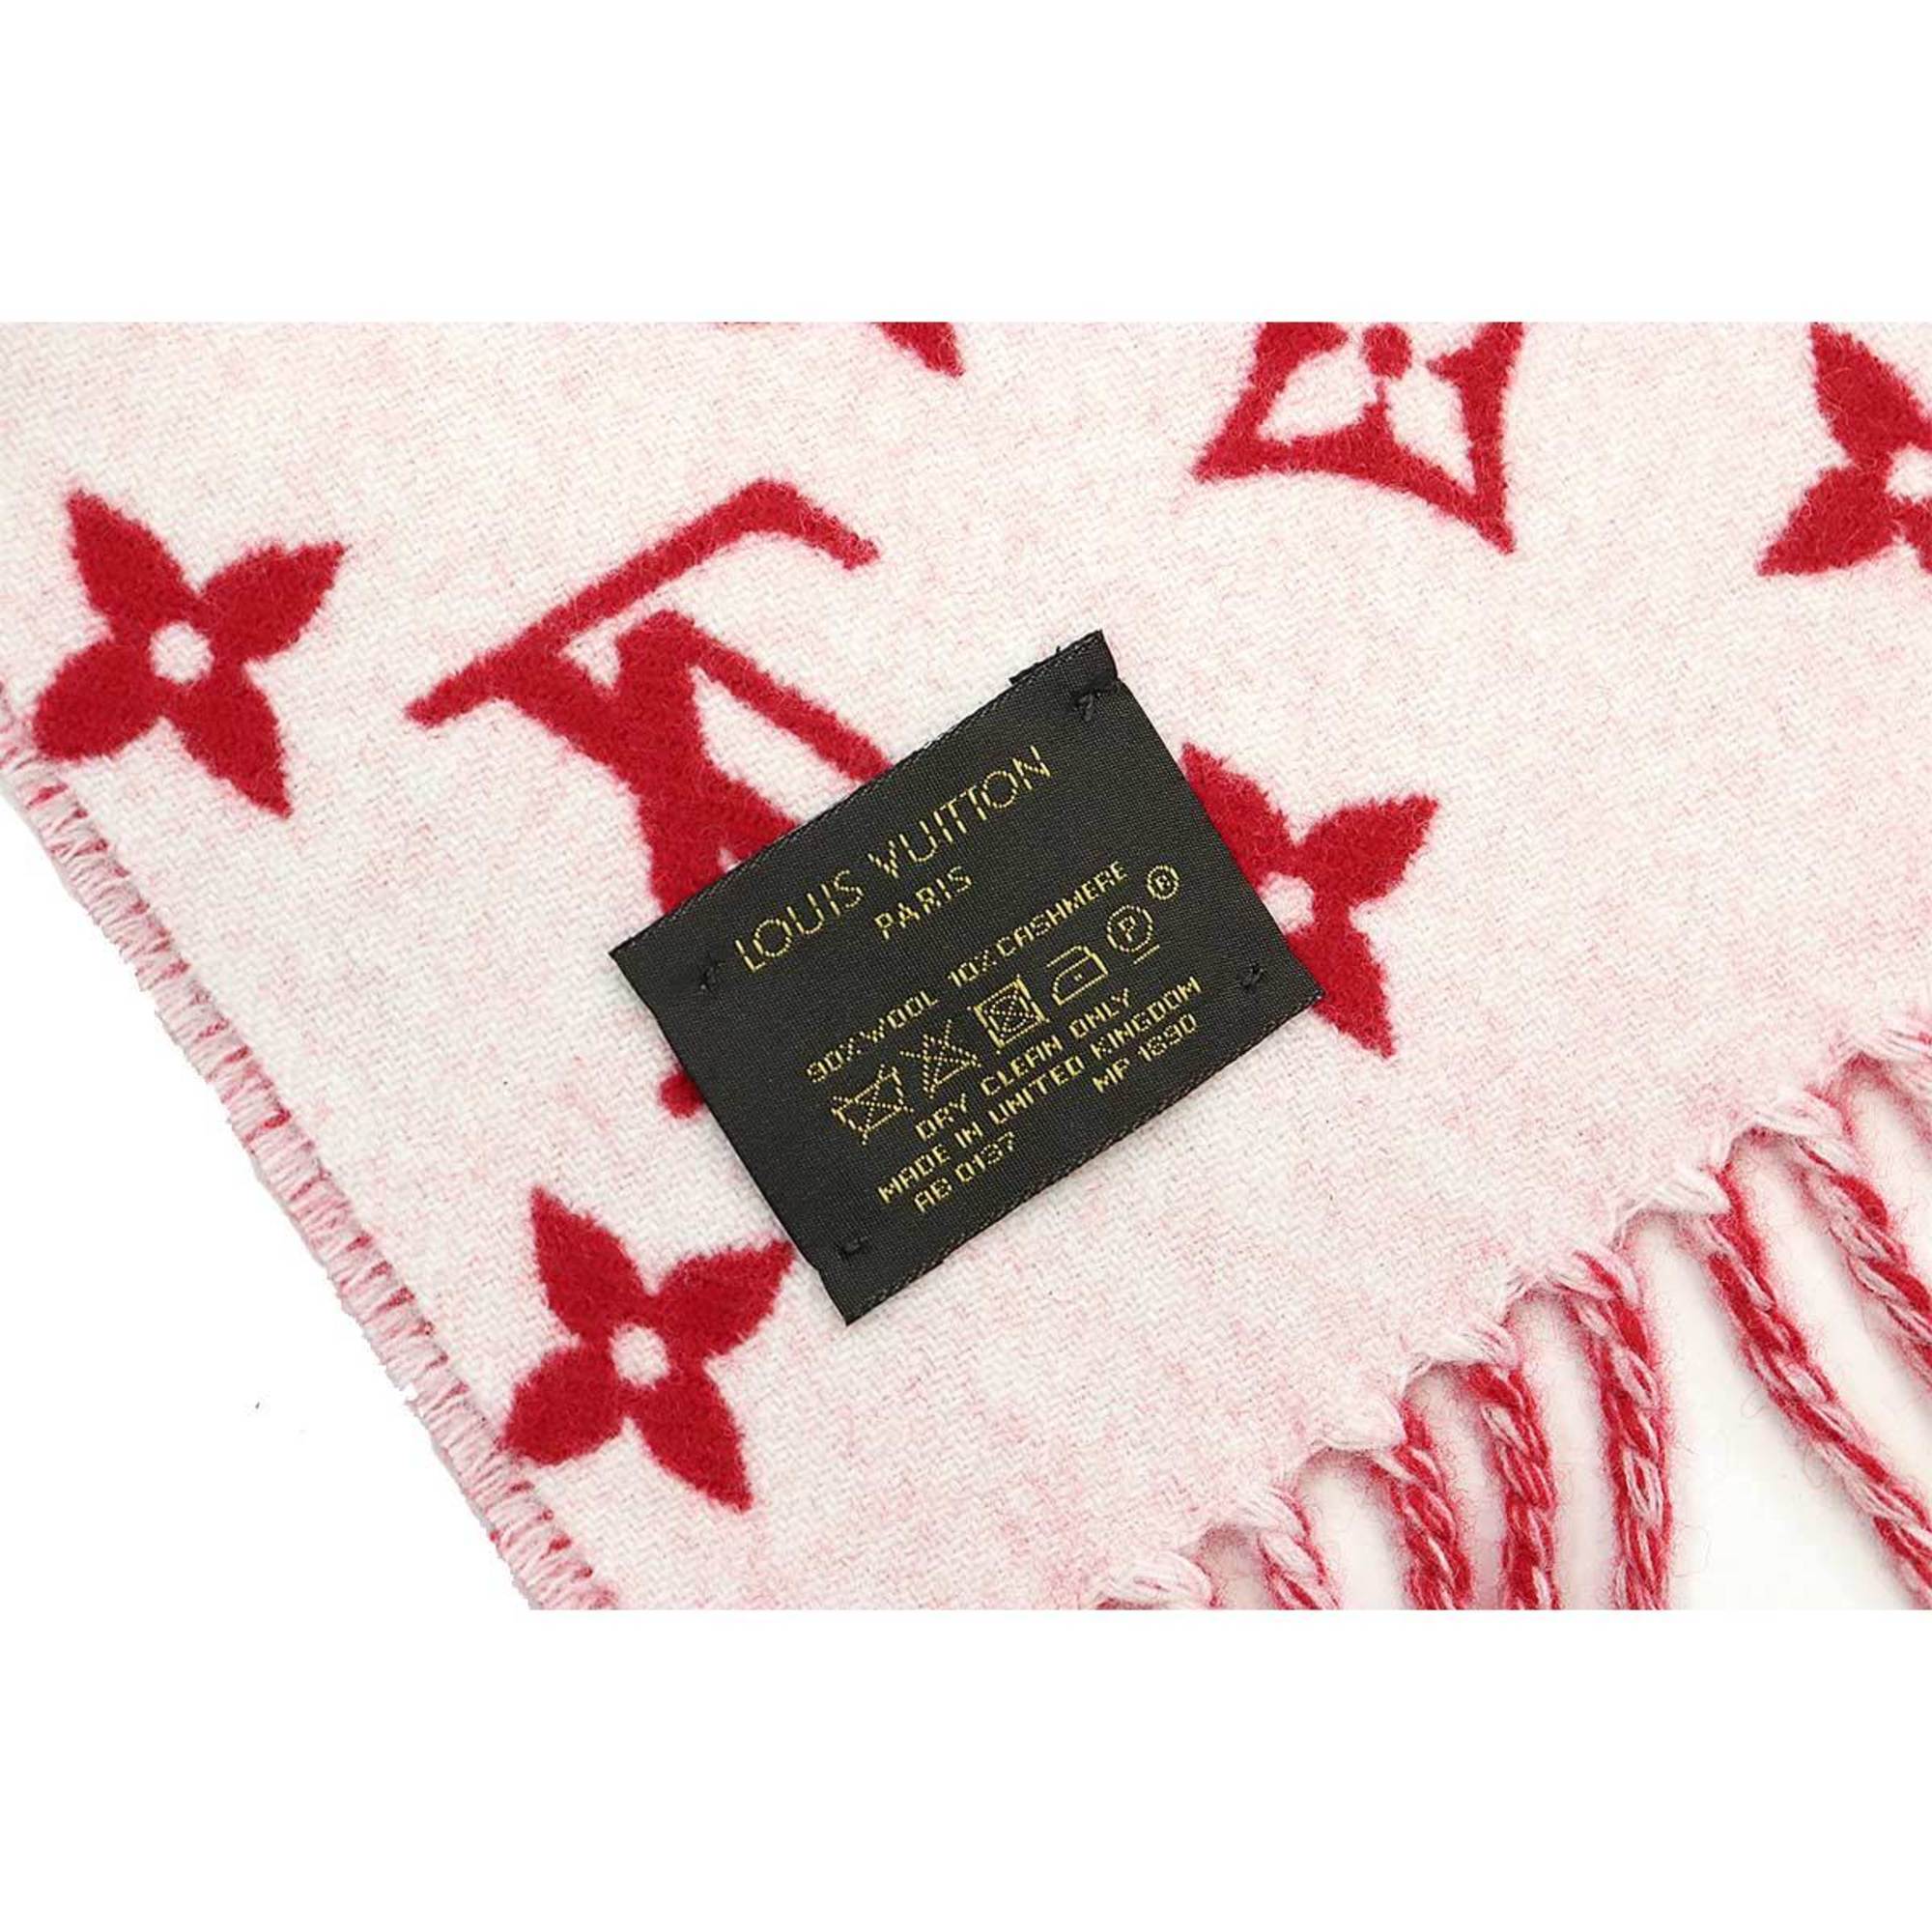 LOUIS VUITTON Supreme Collaboration Scarf Stole Wool Cashmere Red ...